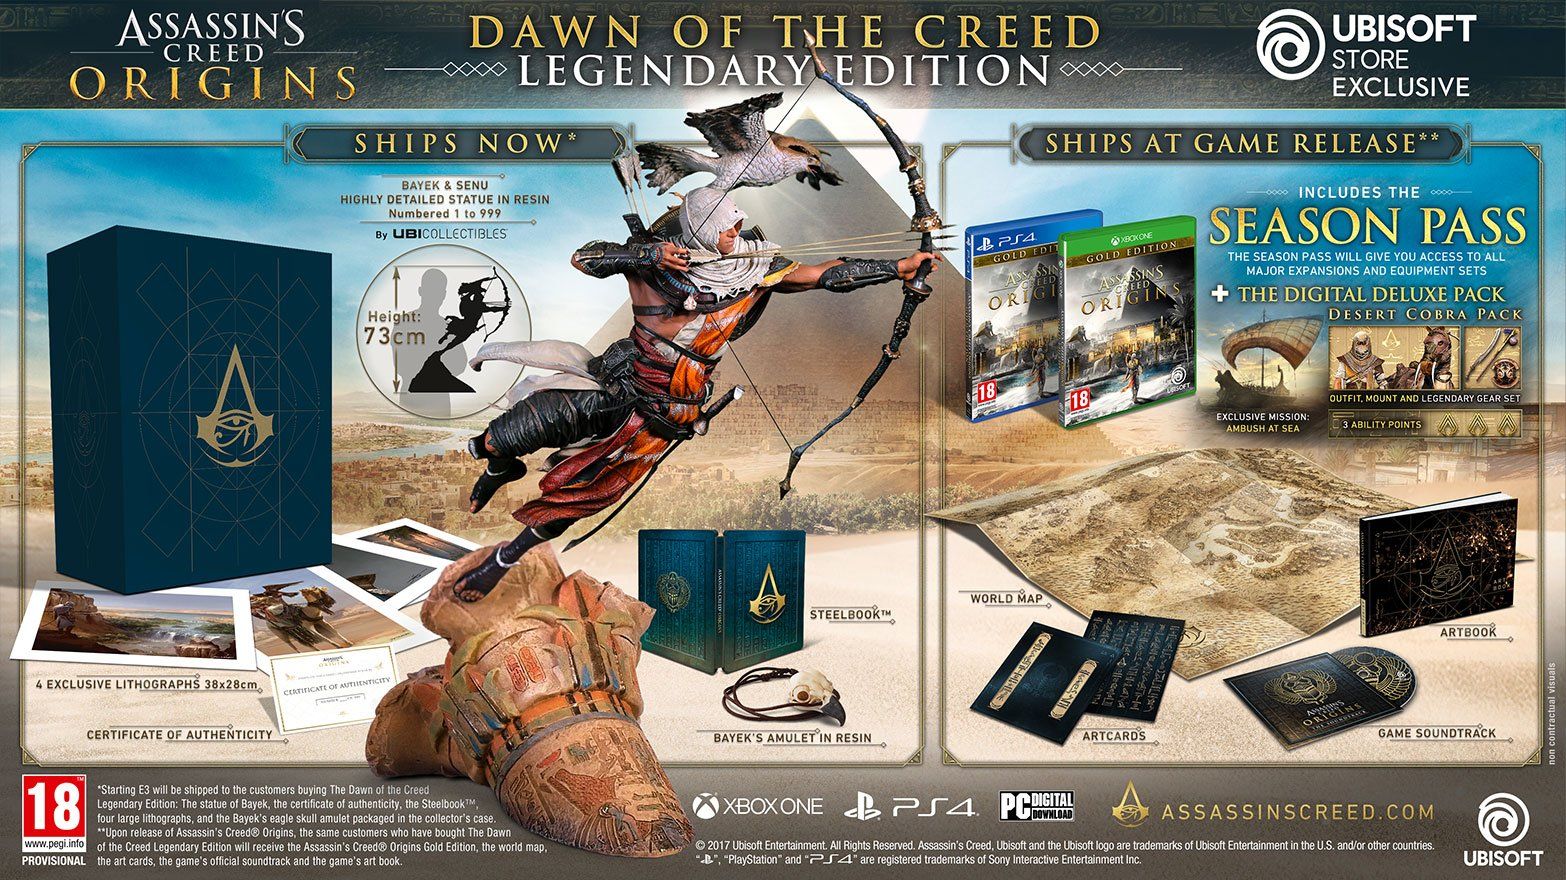 Assassin’s Creed Origins: Dawn of the Creed - Legendary Edition, sadece 2800 TL